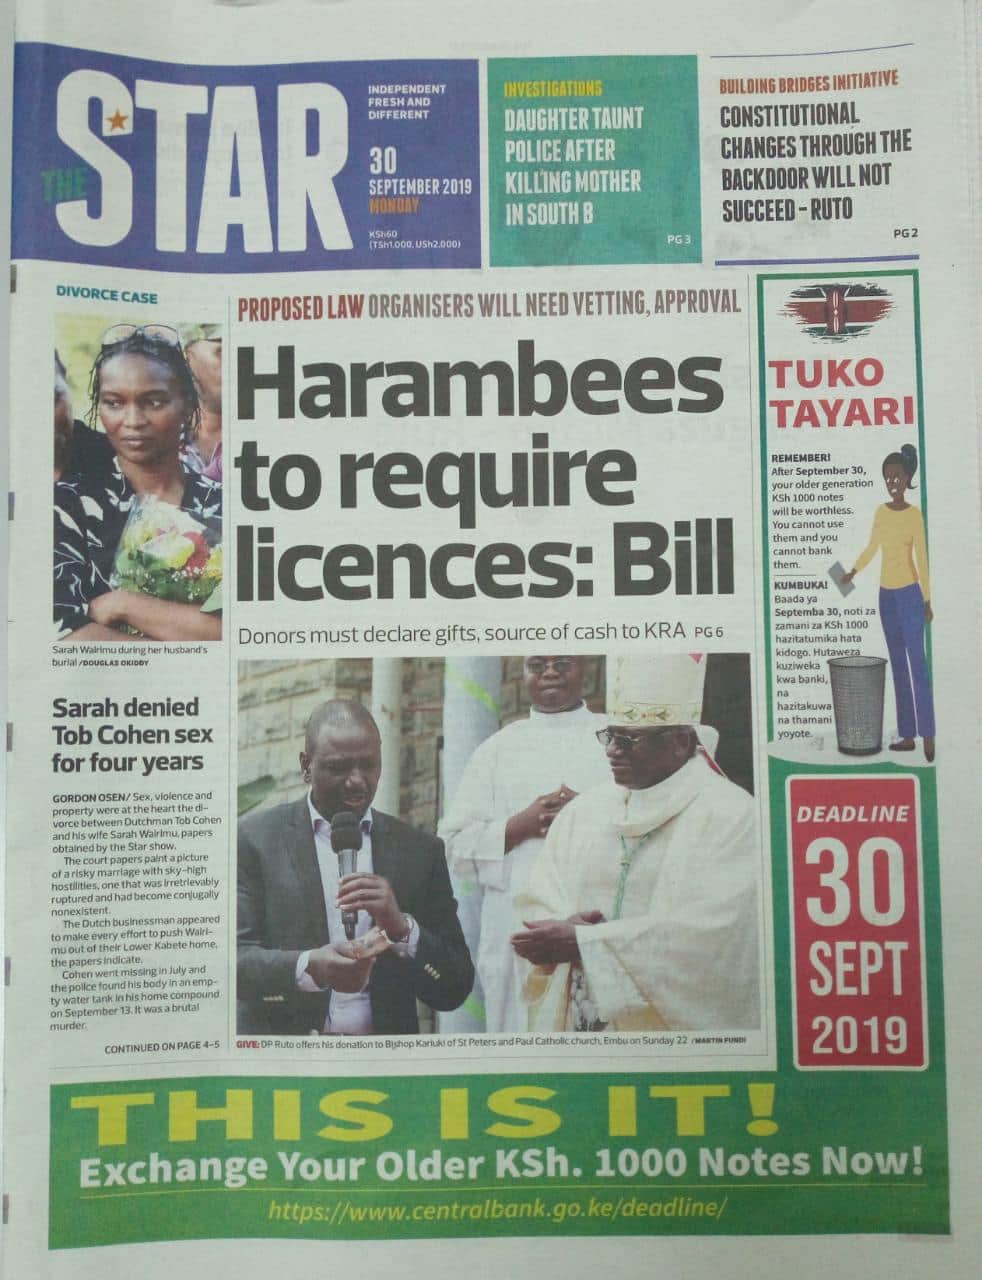 Kenyan newspapers review for September 30: Kenyans to secure licences before holding harambees if new bill becomes law